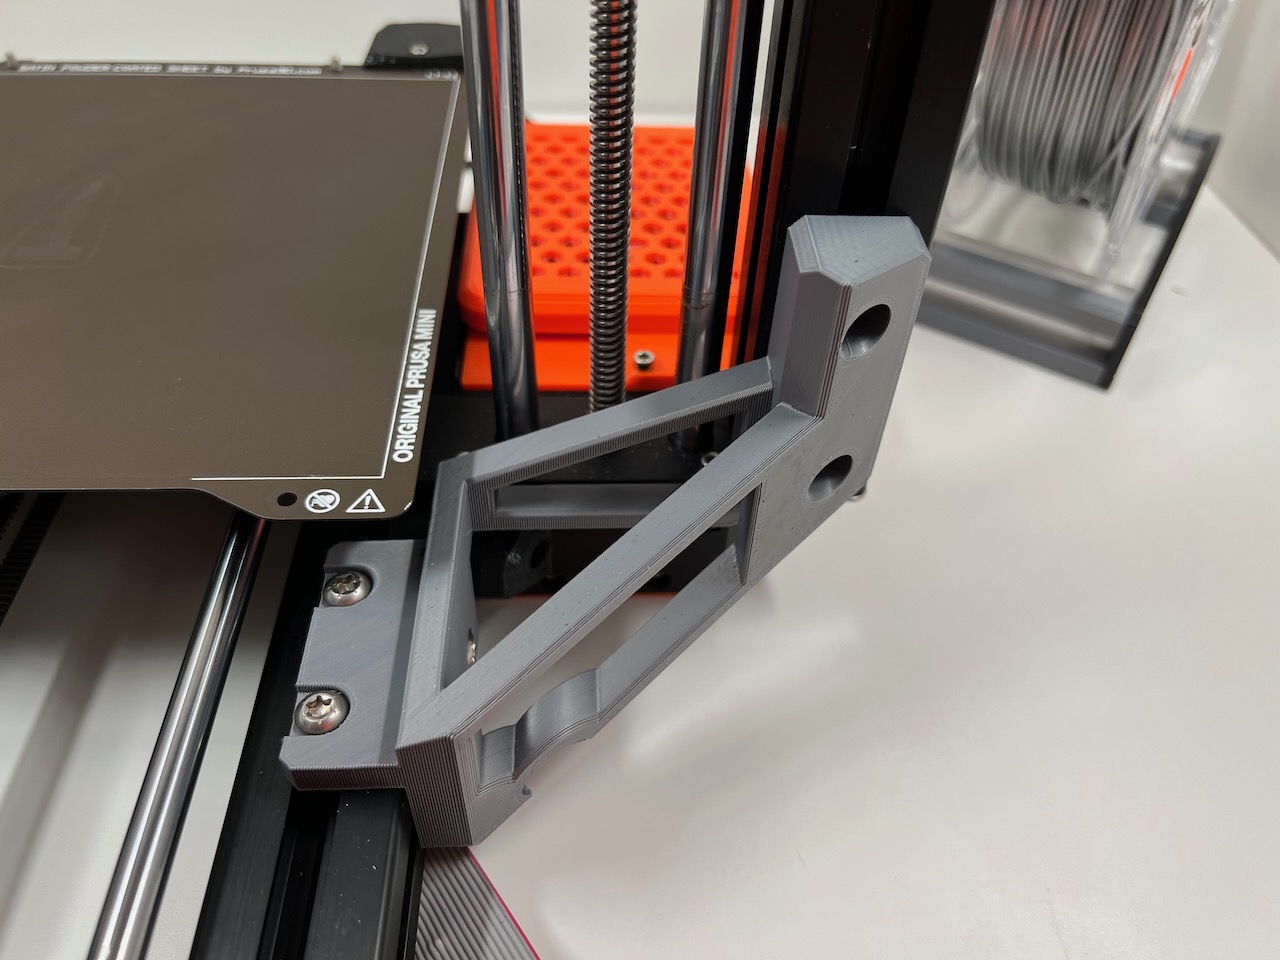 Prusa Mini Z-Axis Support with clearance for Y-Axis bearing holders